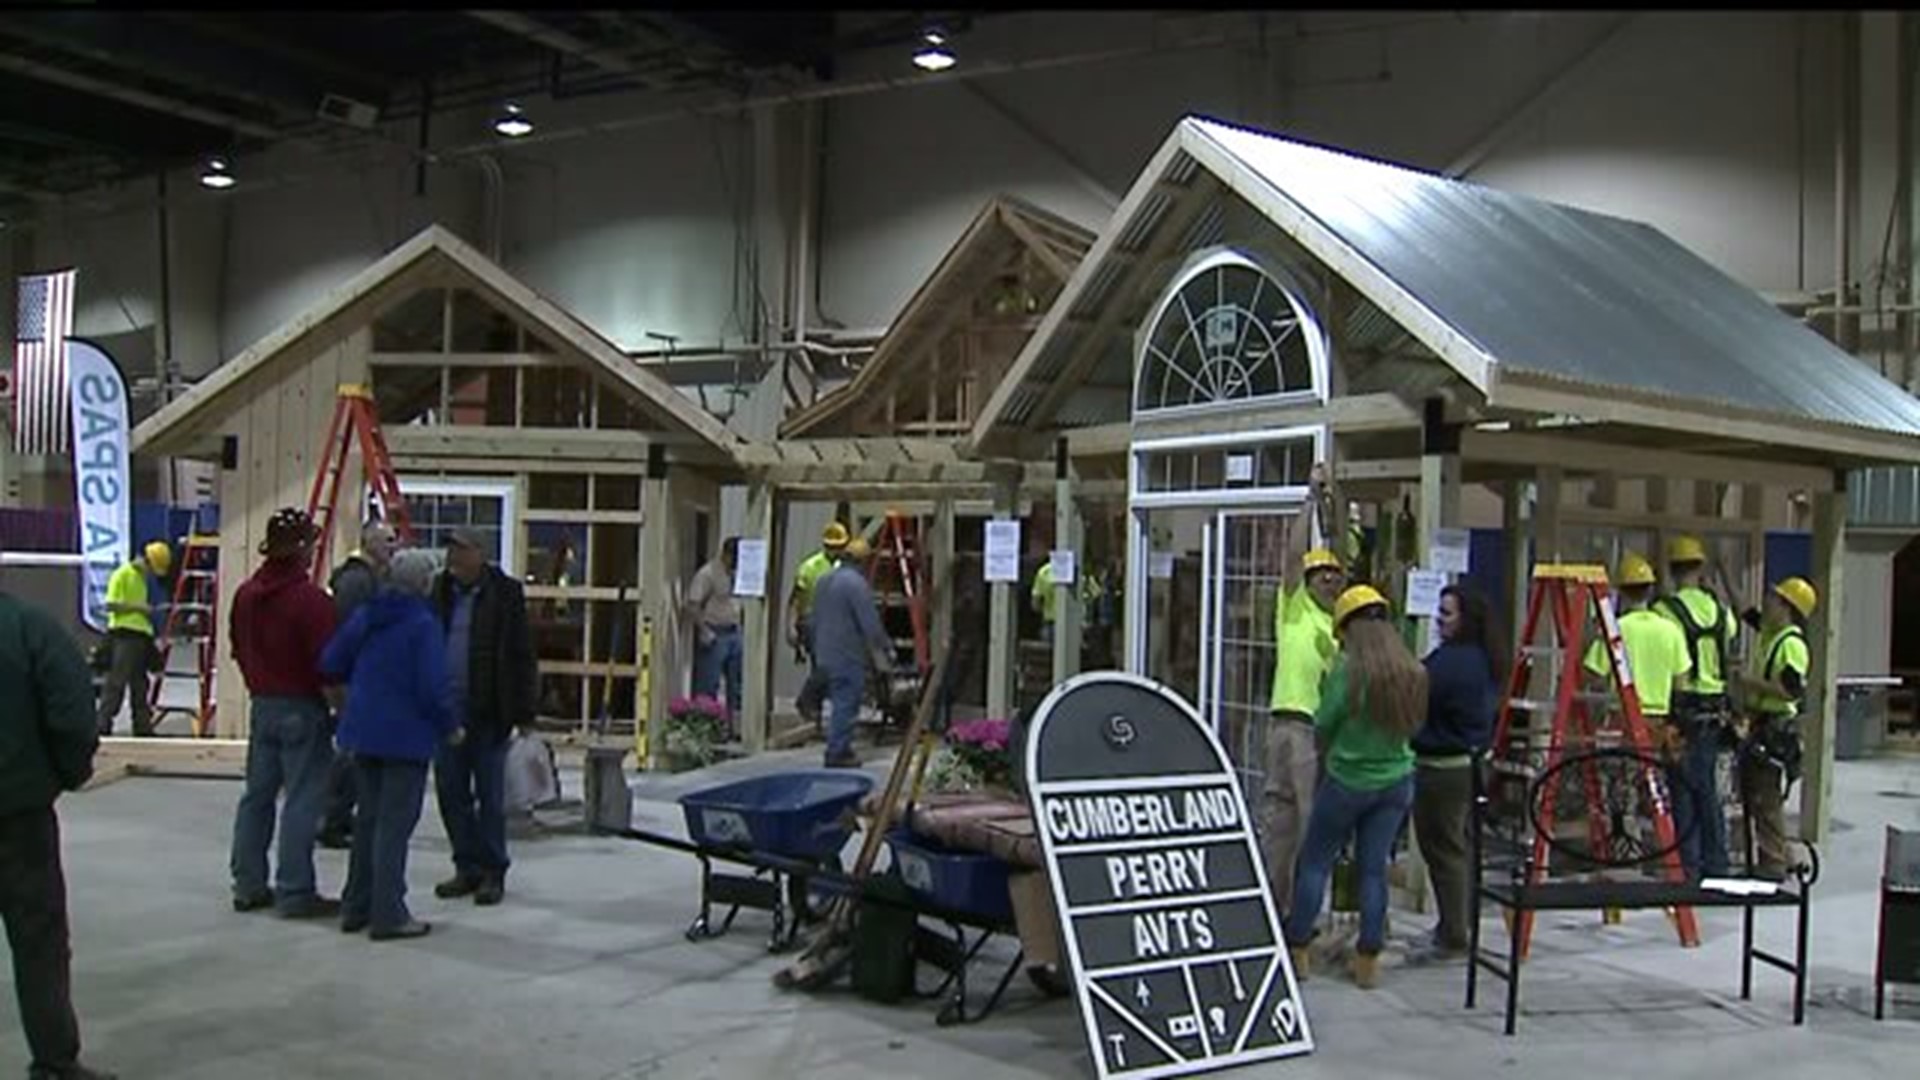 The 43rd Annual Pennsylvania Home Show provides homeowners, prospective